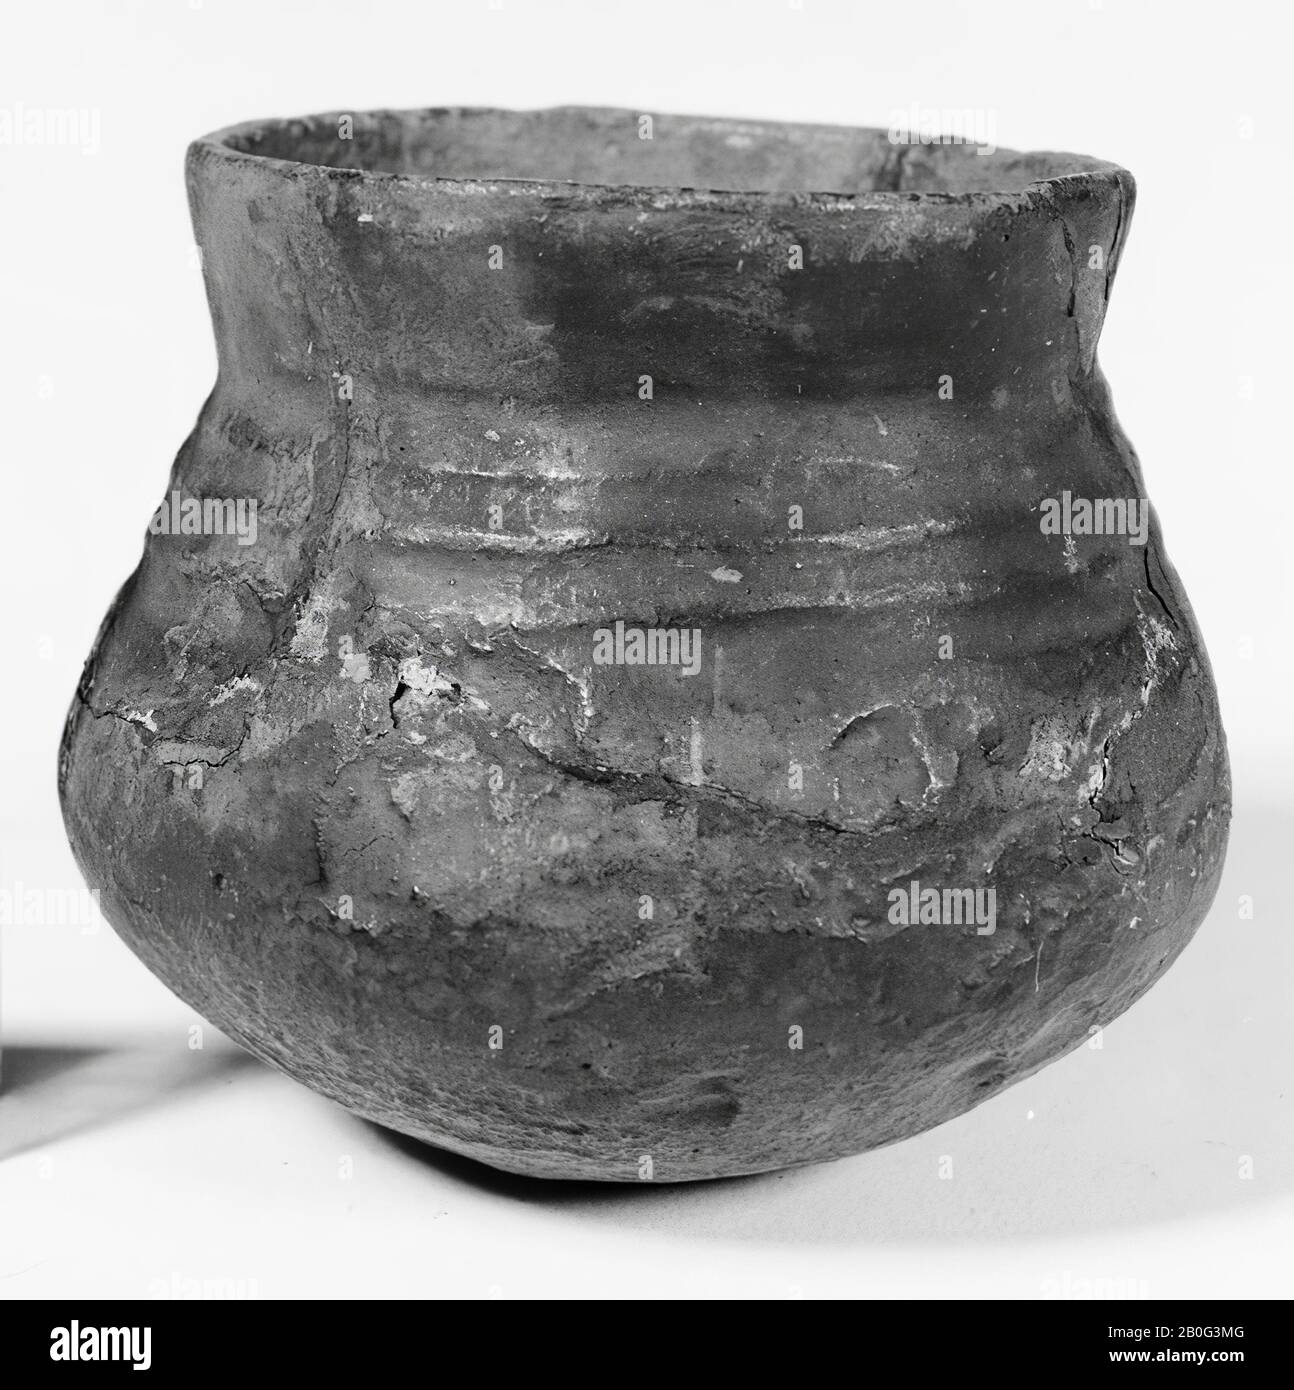 Small urn of earthenware with decoration of horizontal lines on the shoulder. Glues and additions, slight surface damage., Urn, earthenware, h: 8.5 cm, diam: 9.2 cm, prehistory -1200 Stock Photo